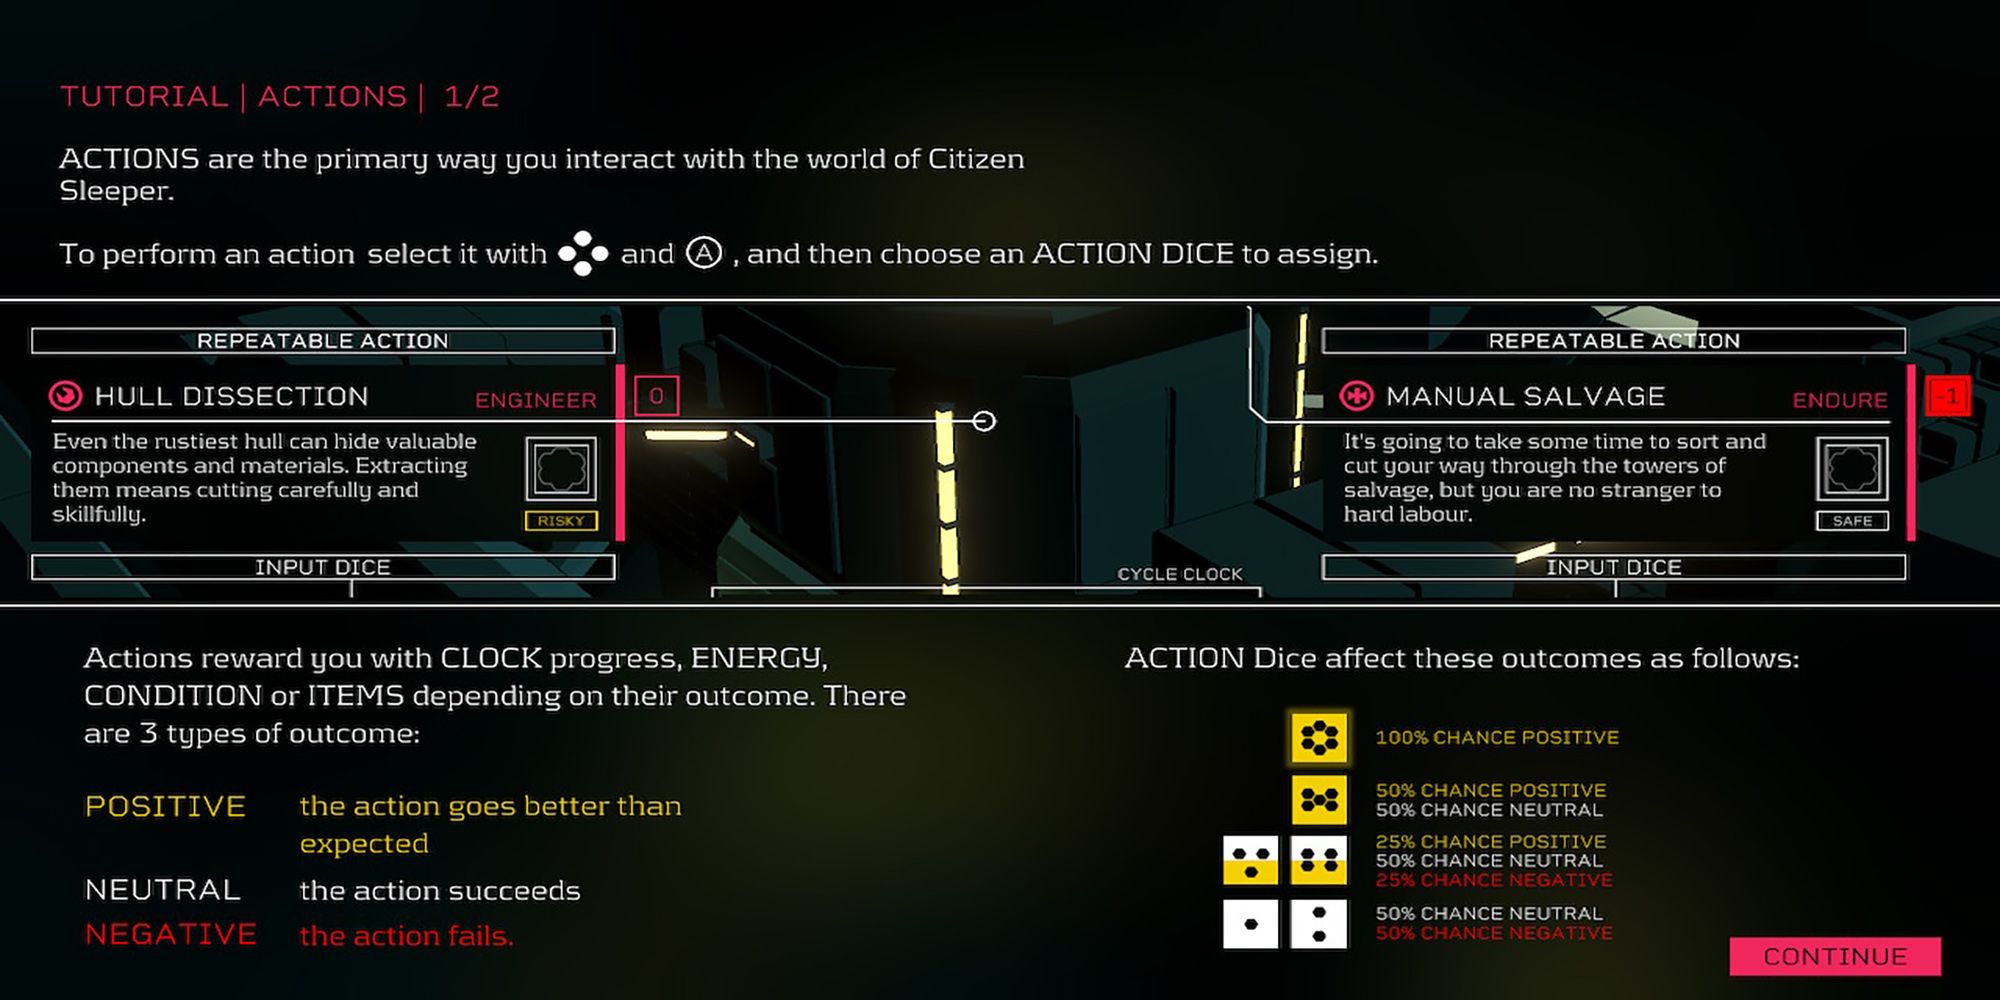 Citizen Sleeper's Dice Action Tutorial breaks down the probability of each die.